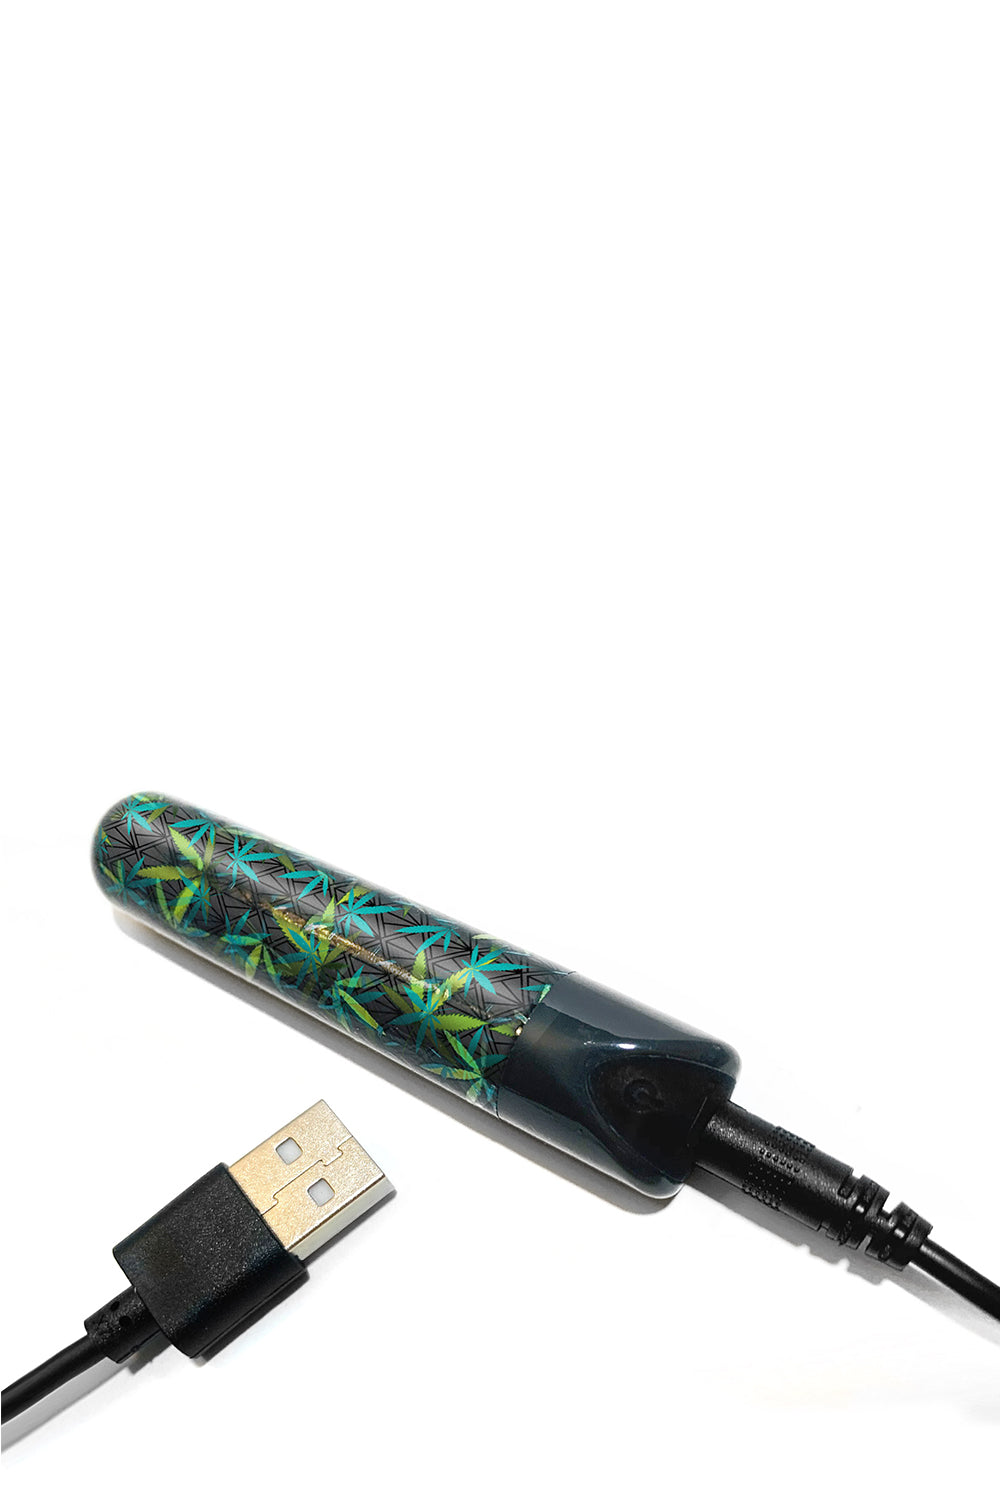 Prints Charming Buzzed Bullet Canna Queen